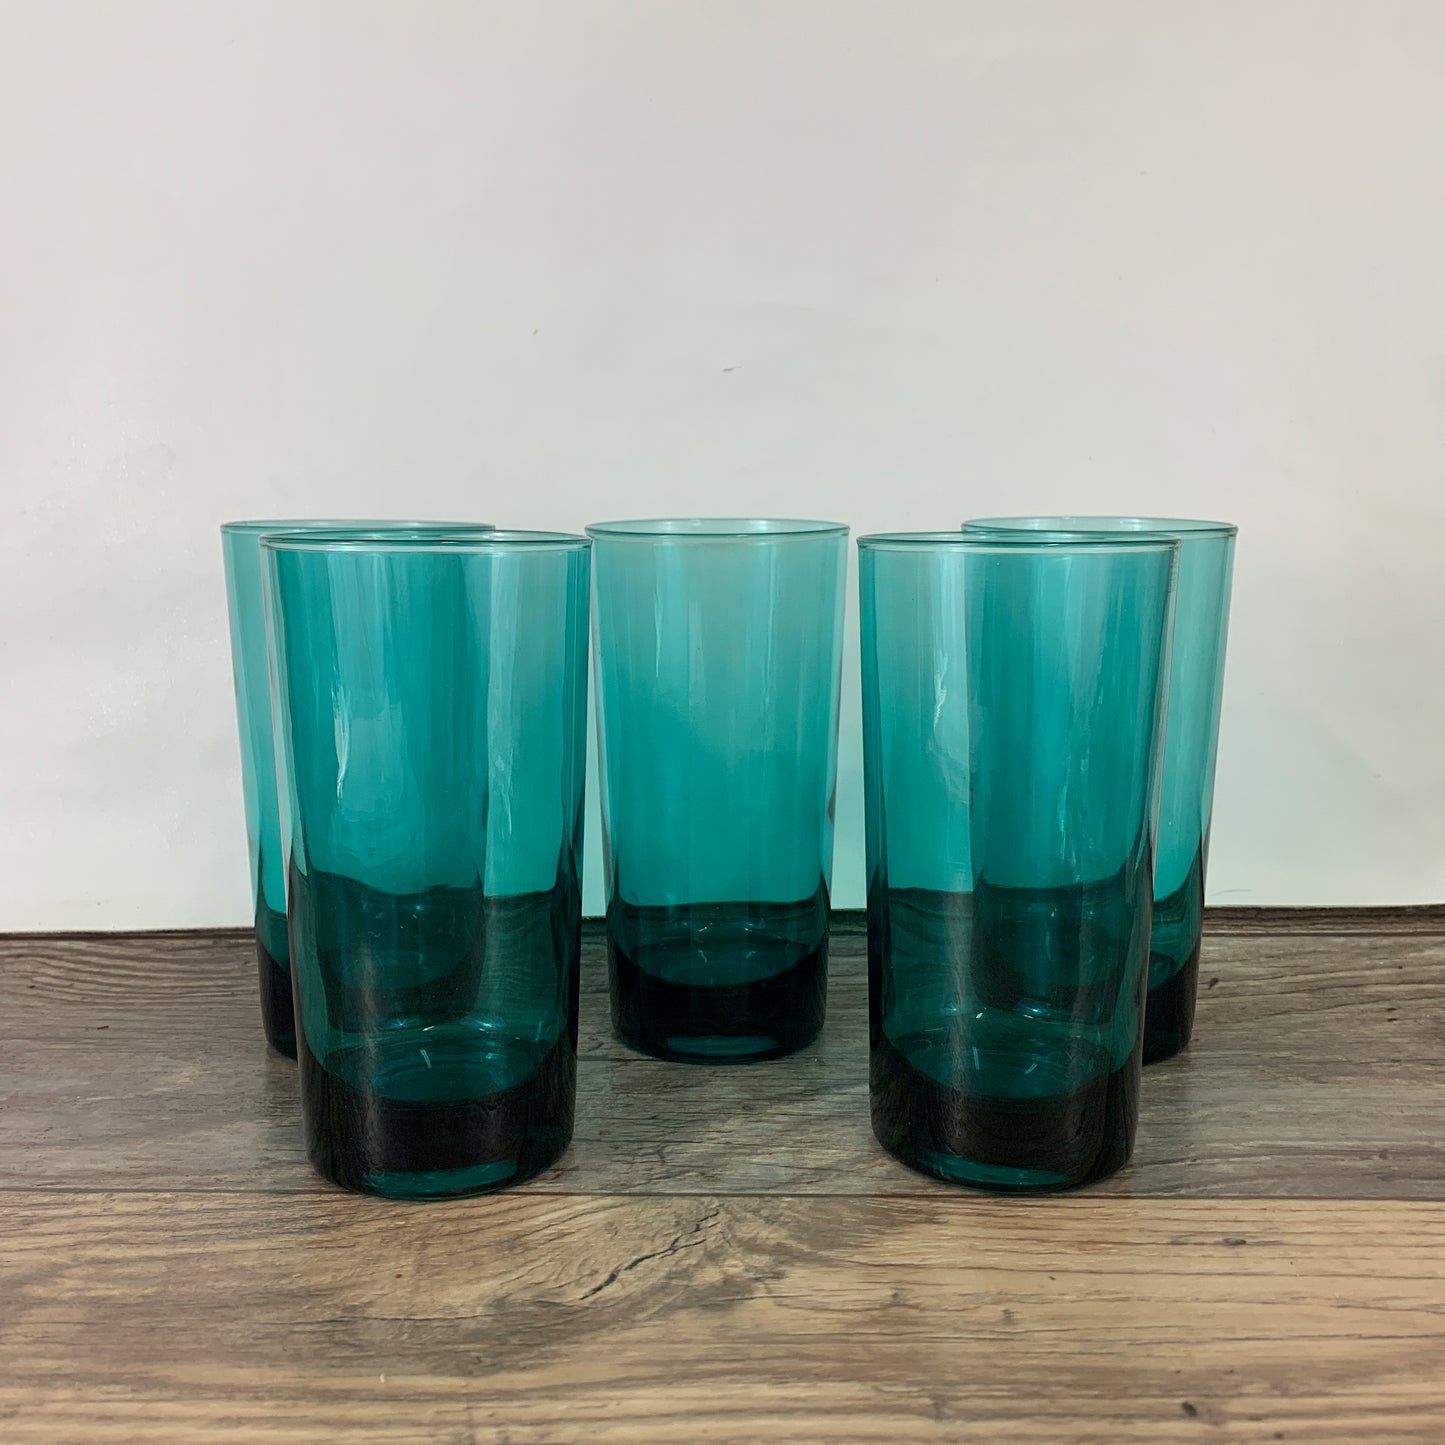 Teal Green Juice Glass Set of 5 Tall Cocktail Glasses